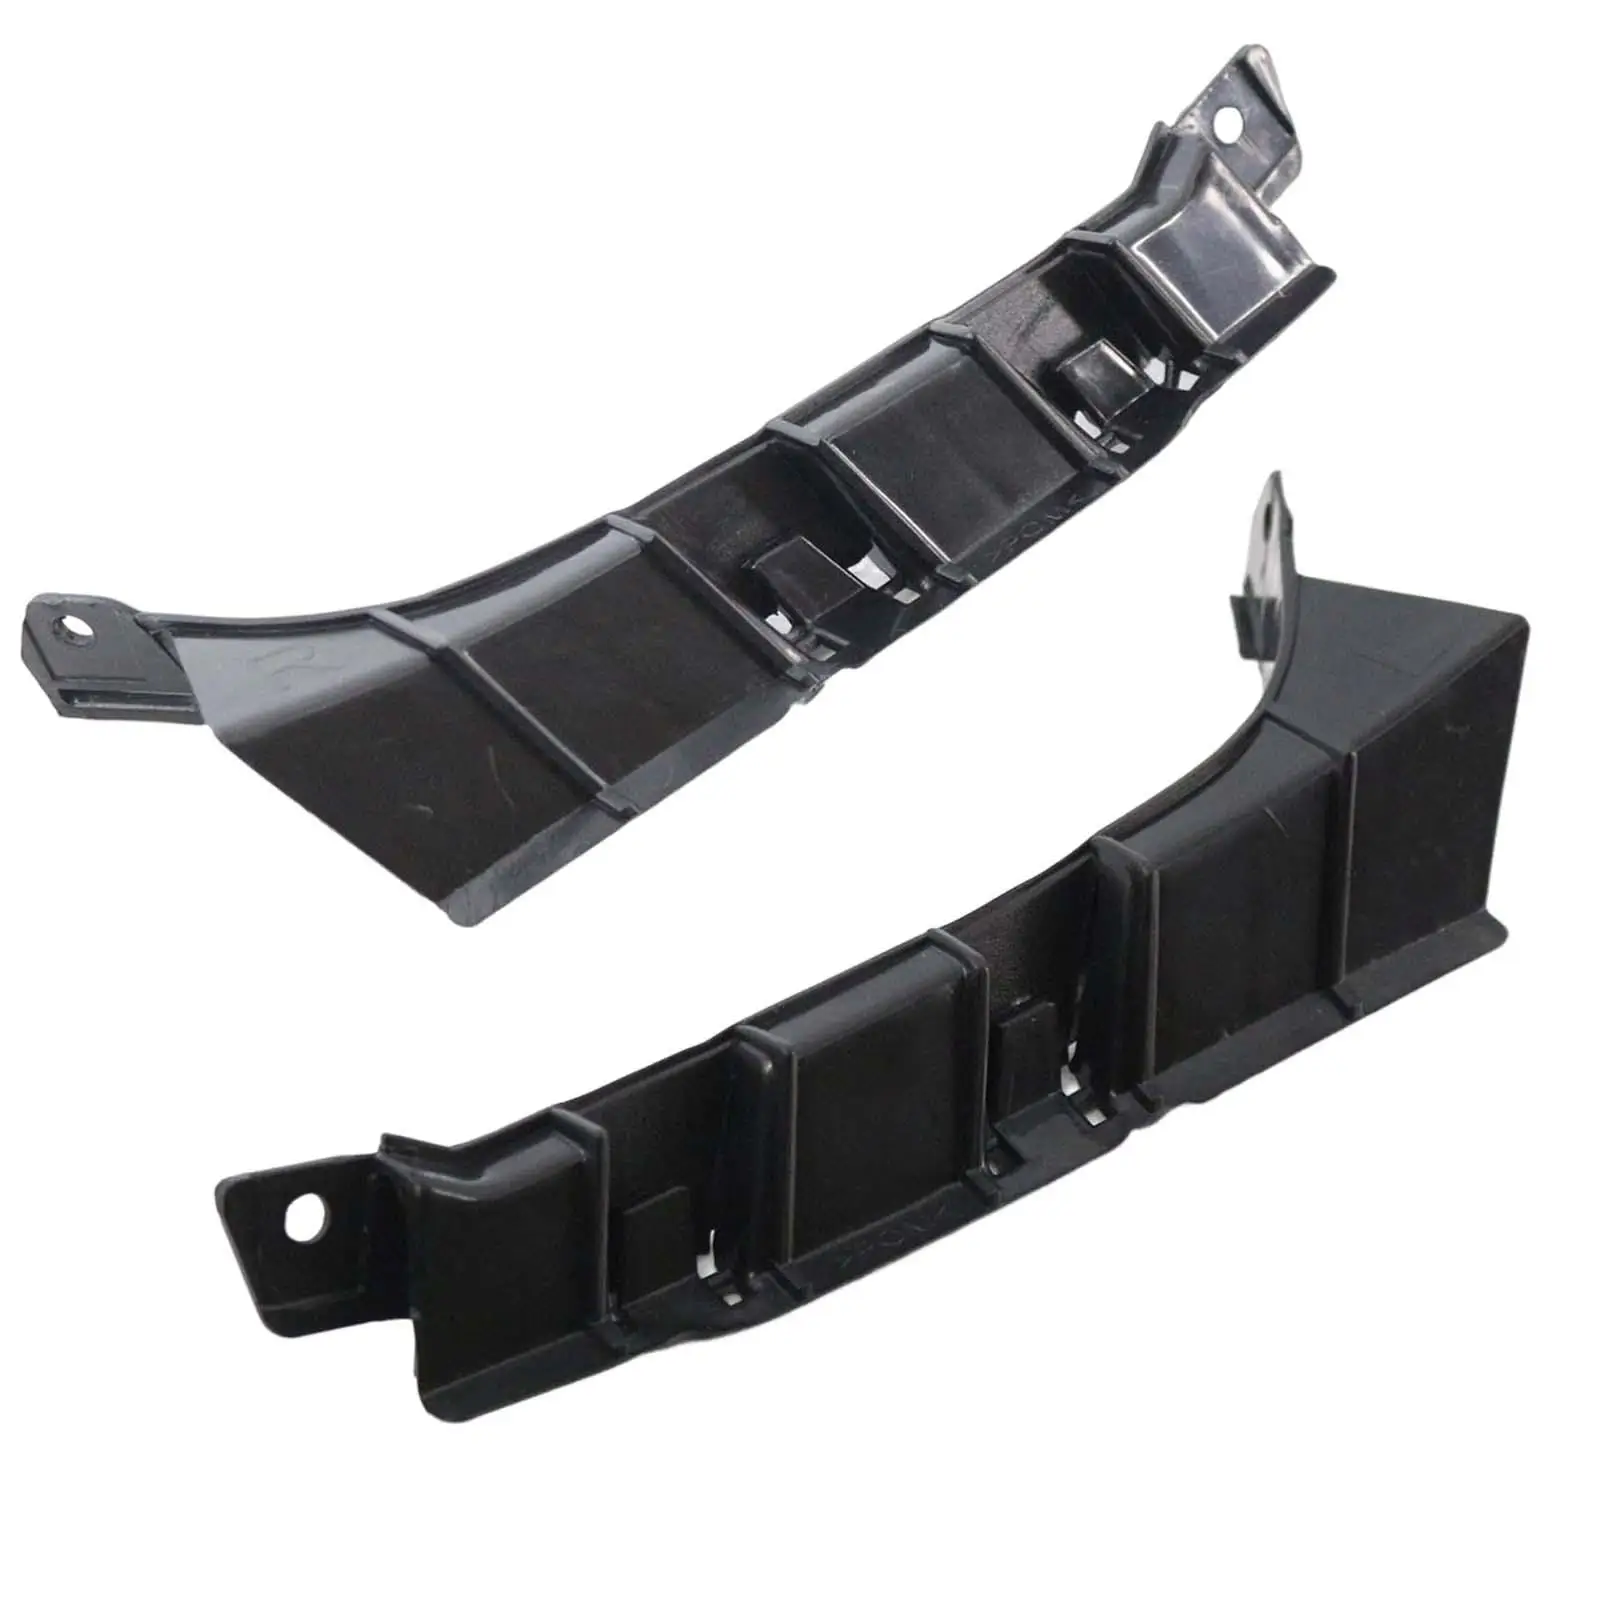 Car Front Bumper Bracket Holder Cover Durable for x5 E53 Spare Parts Replace Easy to Install Accessories